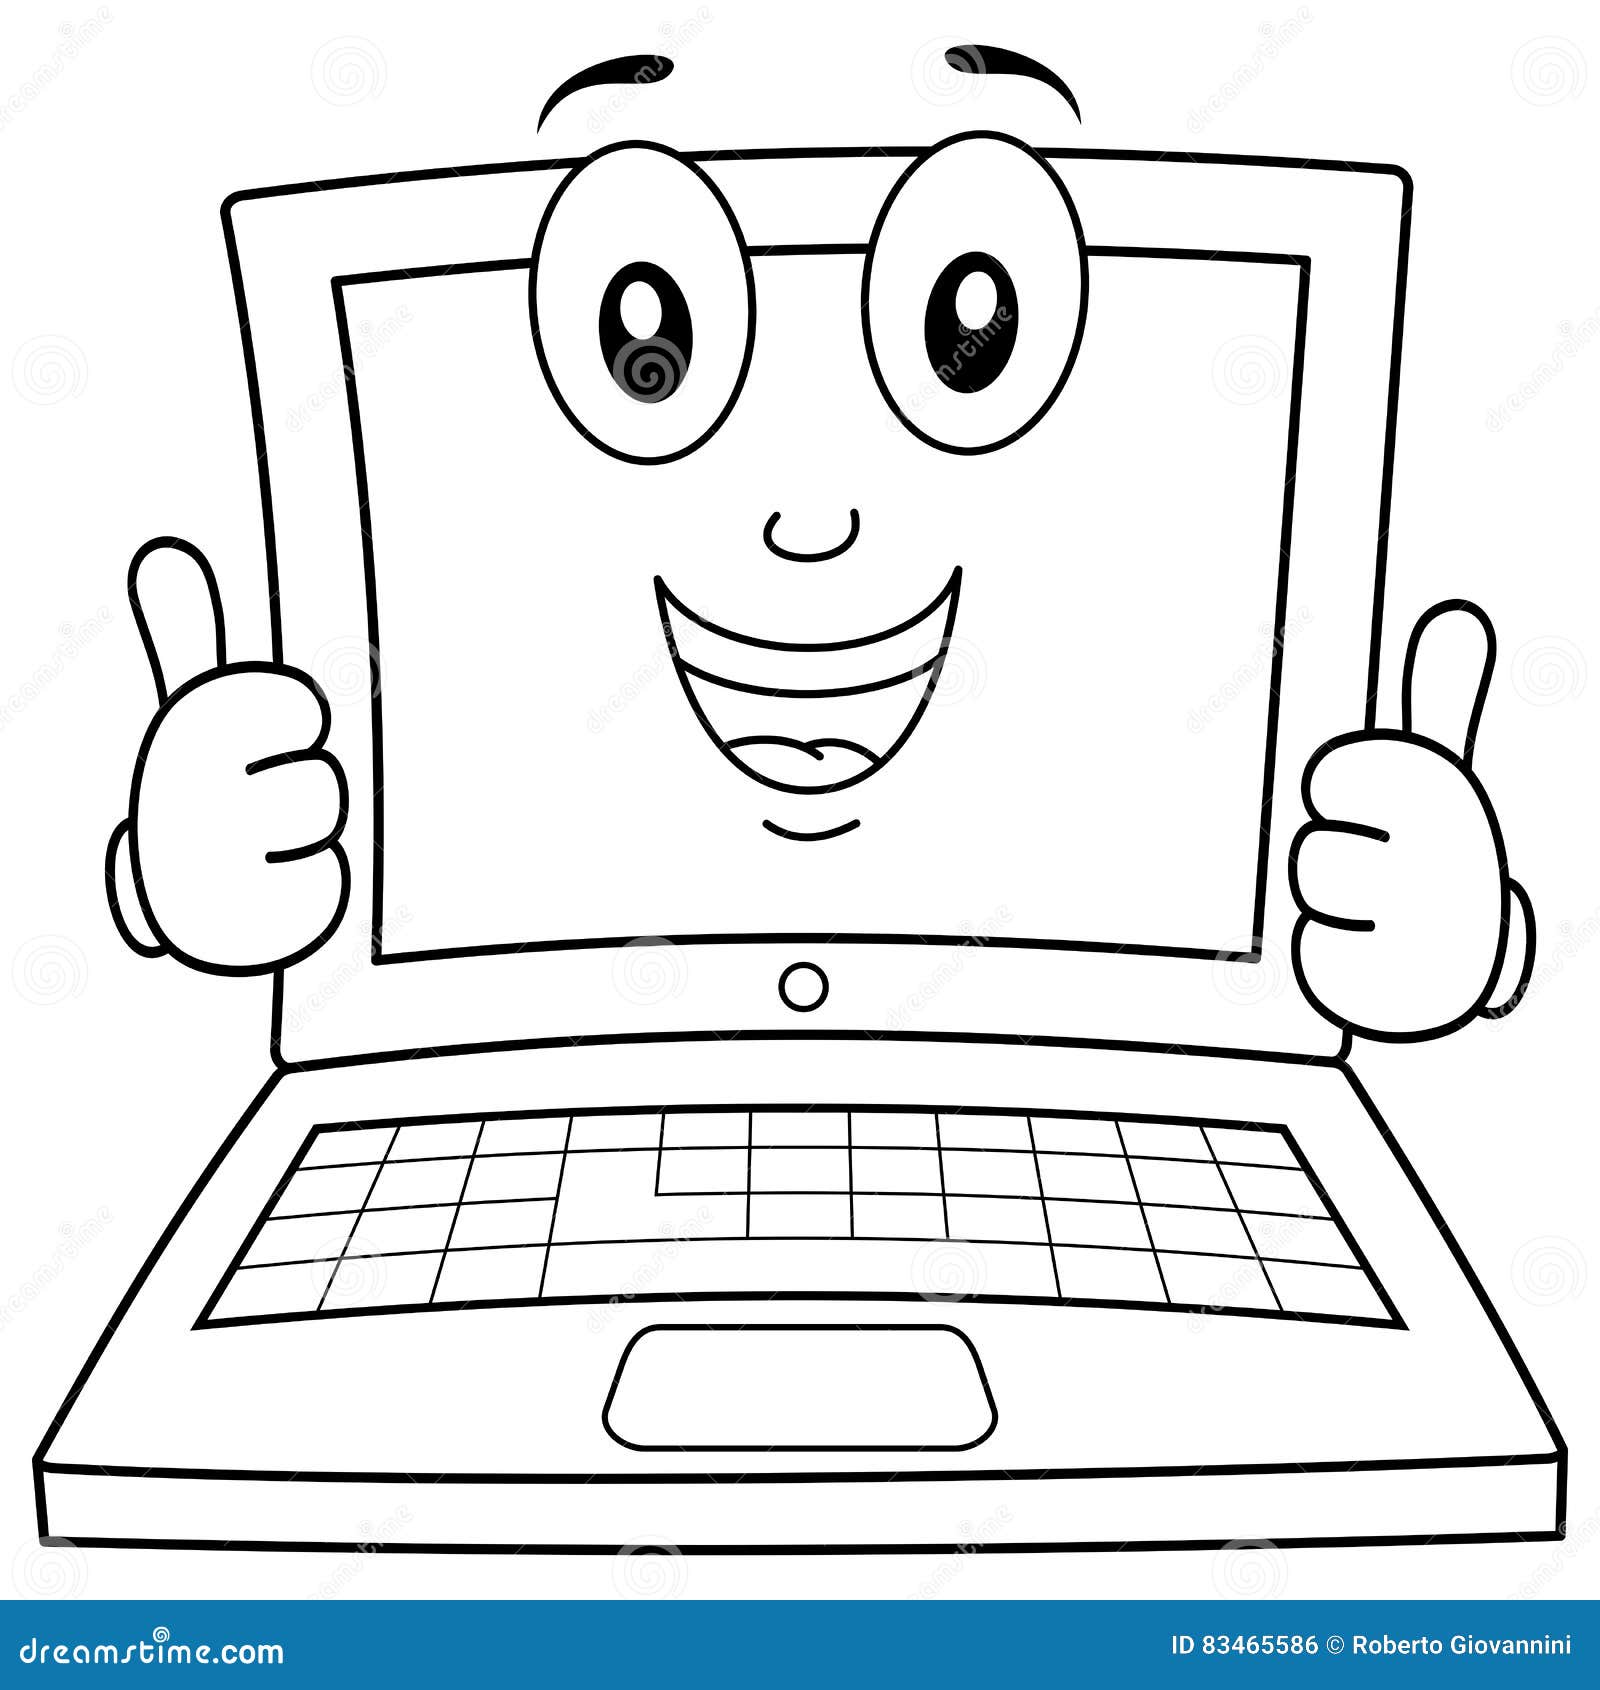 Coloring Laptop or Notebook Character Stock Vector - Illustration of ...